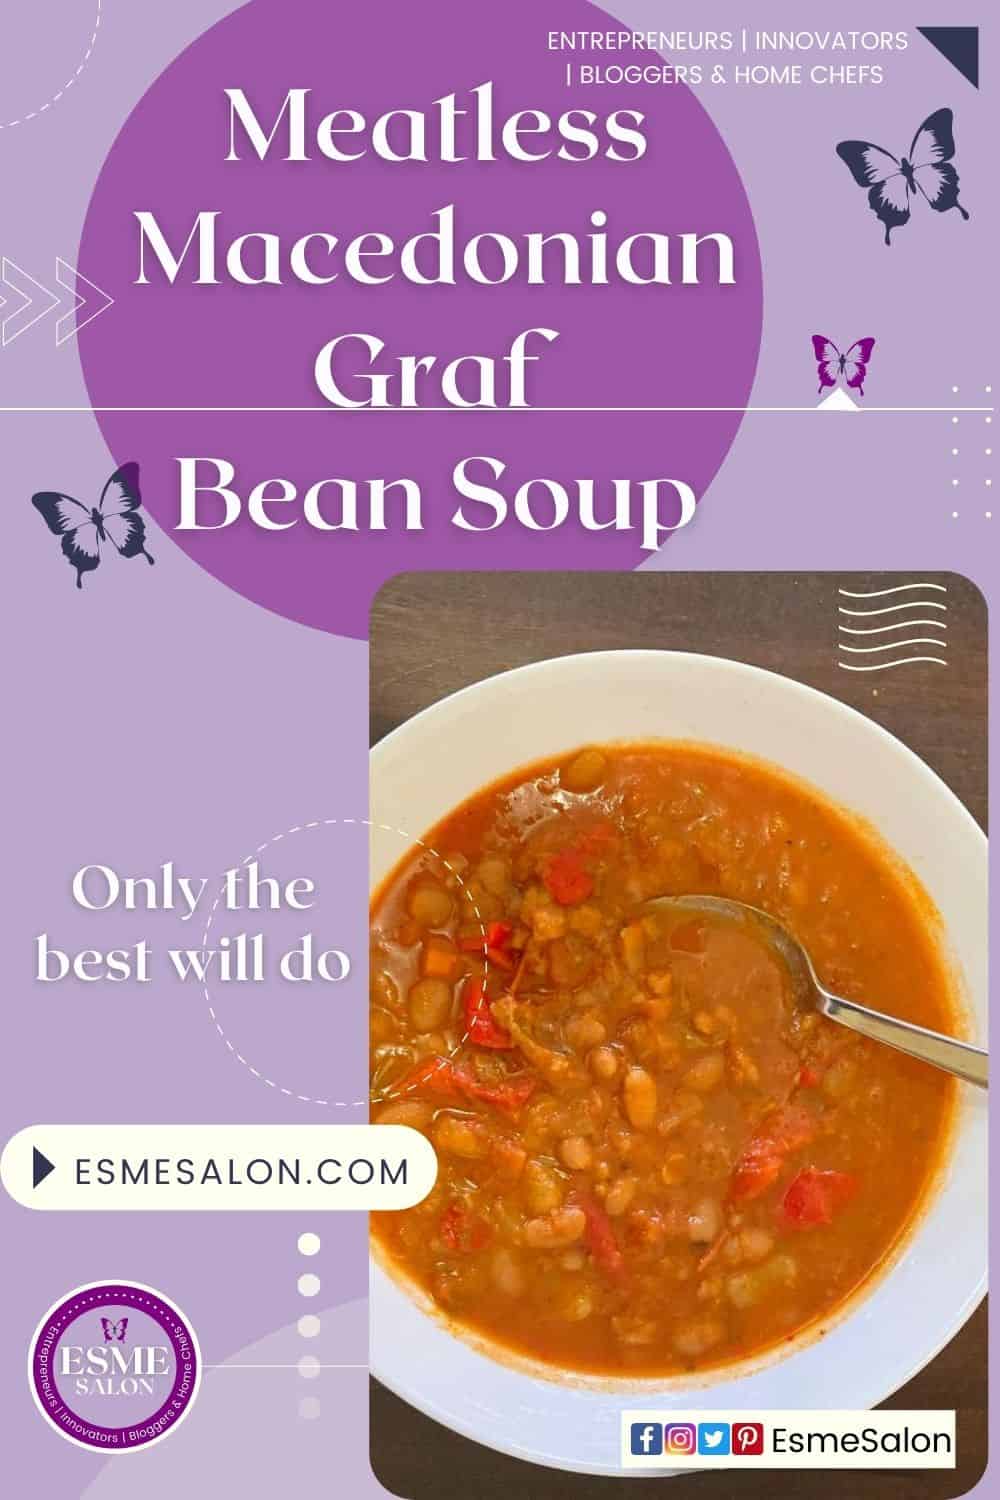 An image of a white bowl of Macedonian No Meat Graf Bean Soup